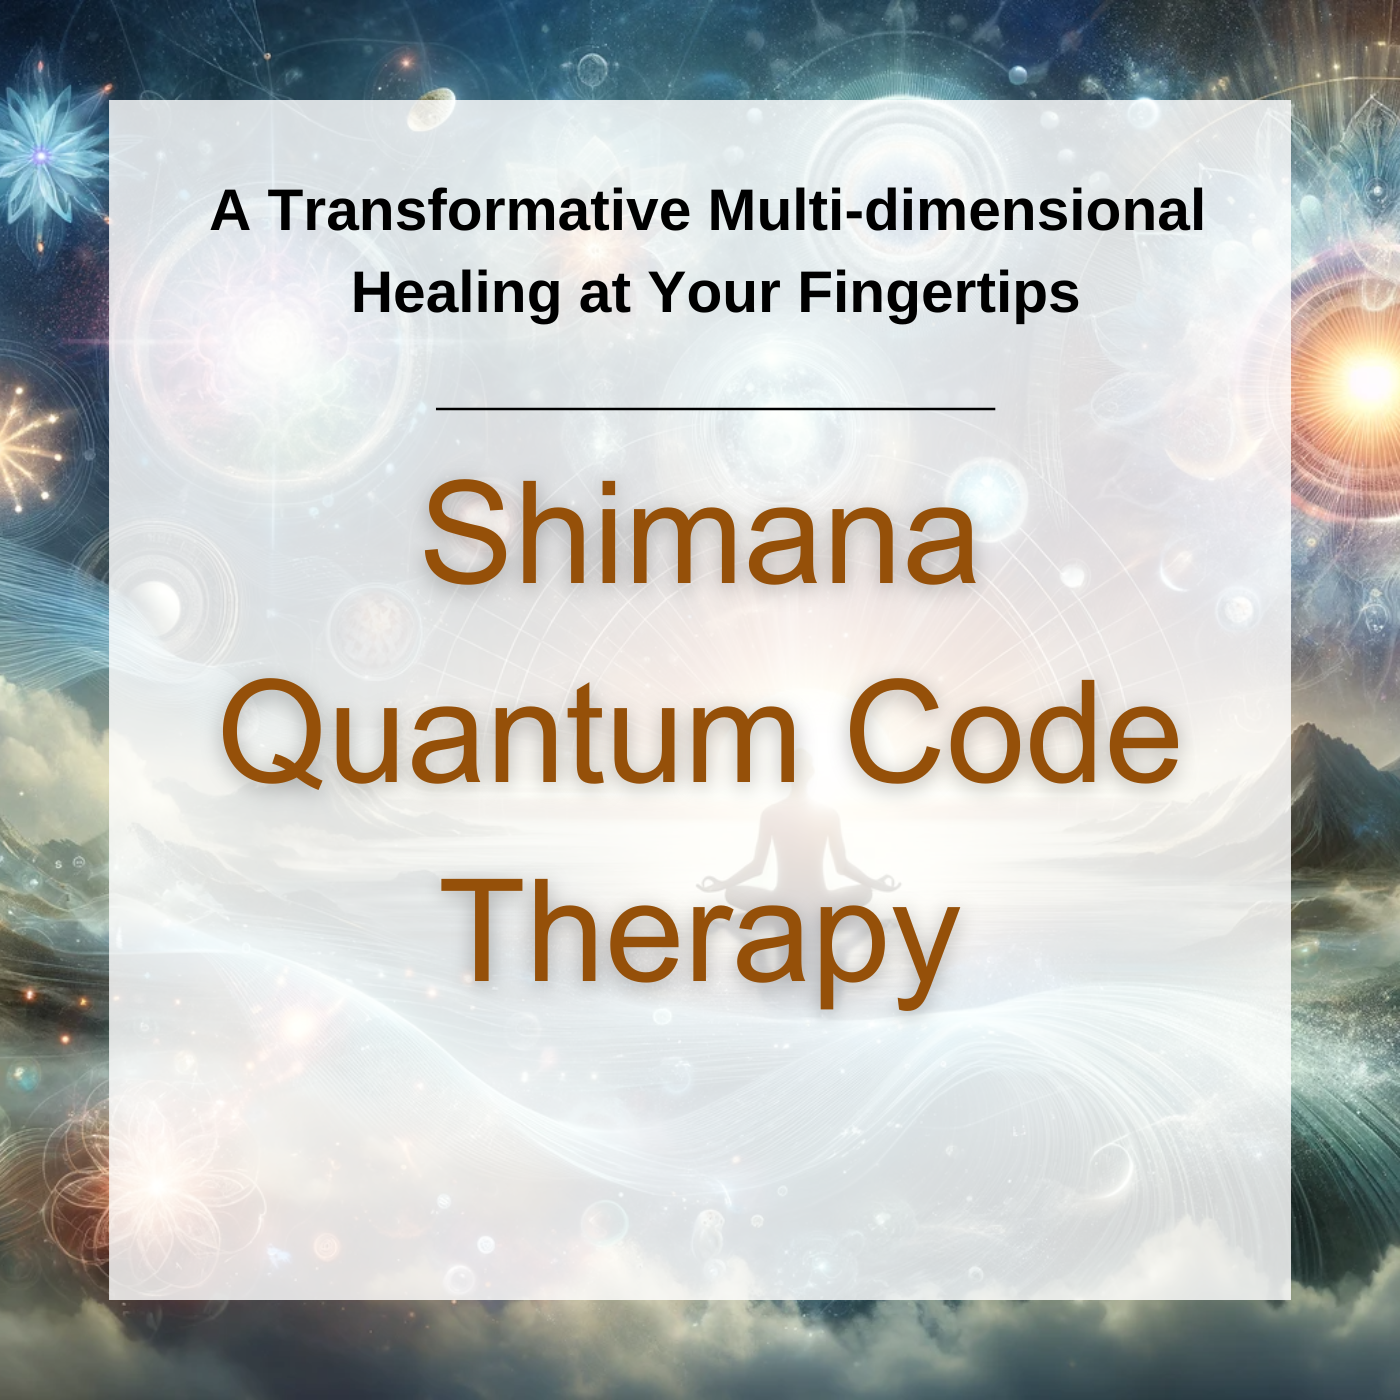 shimana quantum code therapy, a revolutionary multi dimensional healing technique created by shima shad rouh, where ancient healing modalities meet new age science.